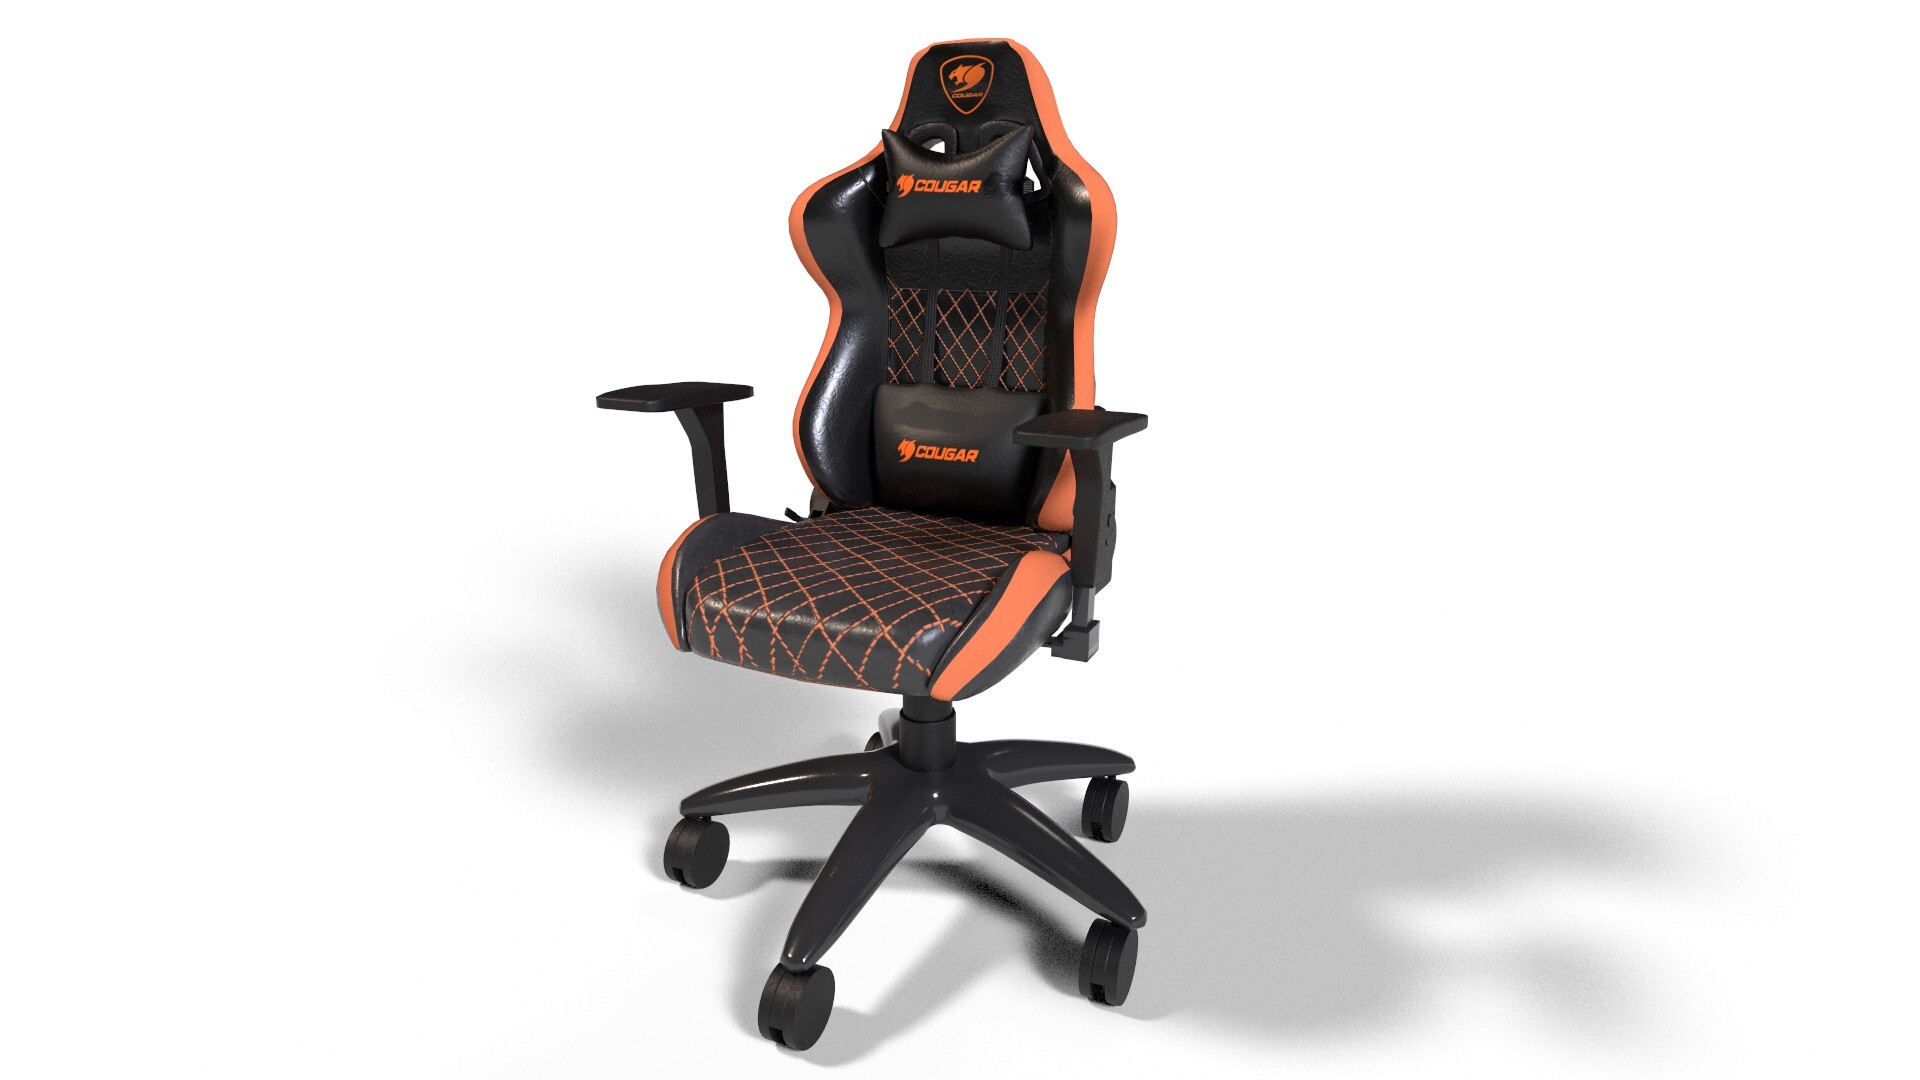 COUGAR ARMOR PRO - Gaming Chair - COUGAR